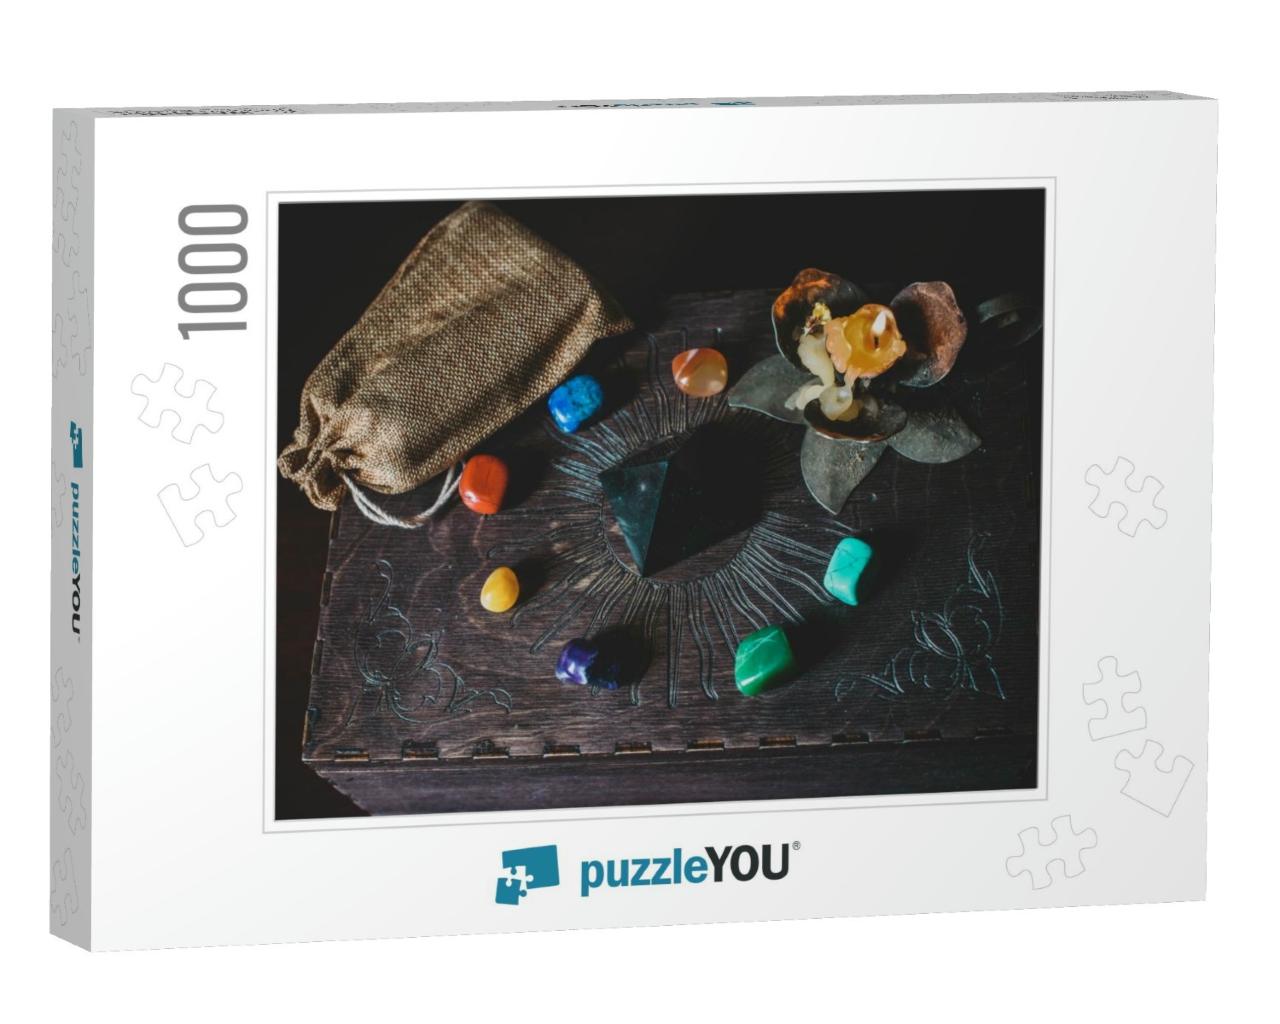 A Fortune Teller, Witch Stuff on a Table, Candles & Fortu... Jigsaw Puzzle with 1000 pieces